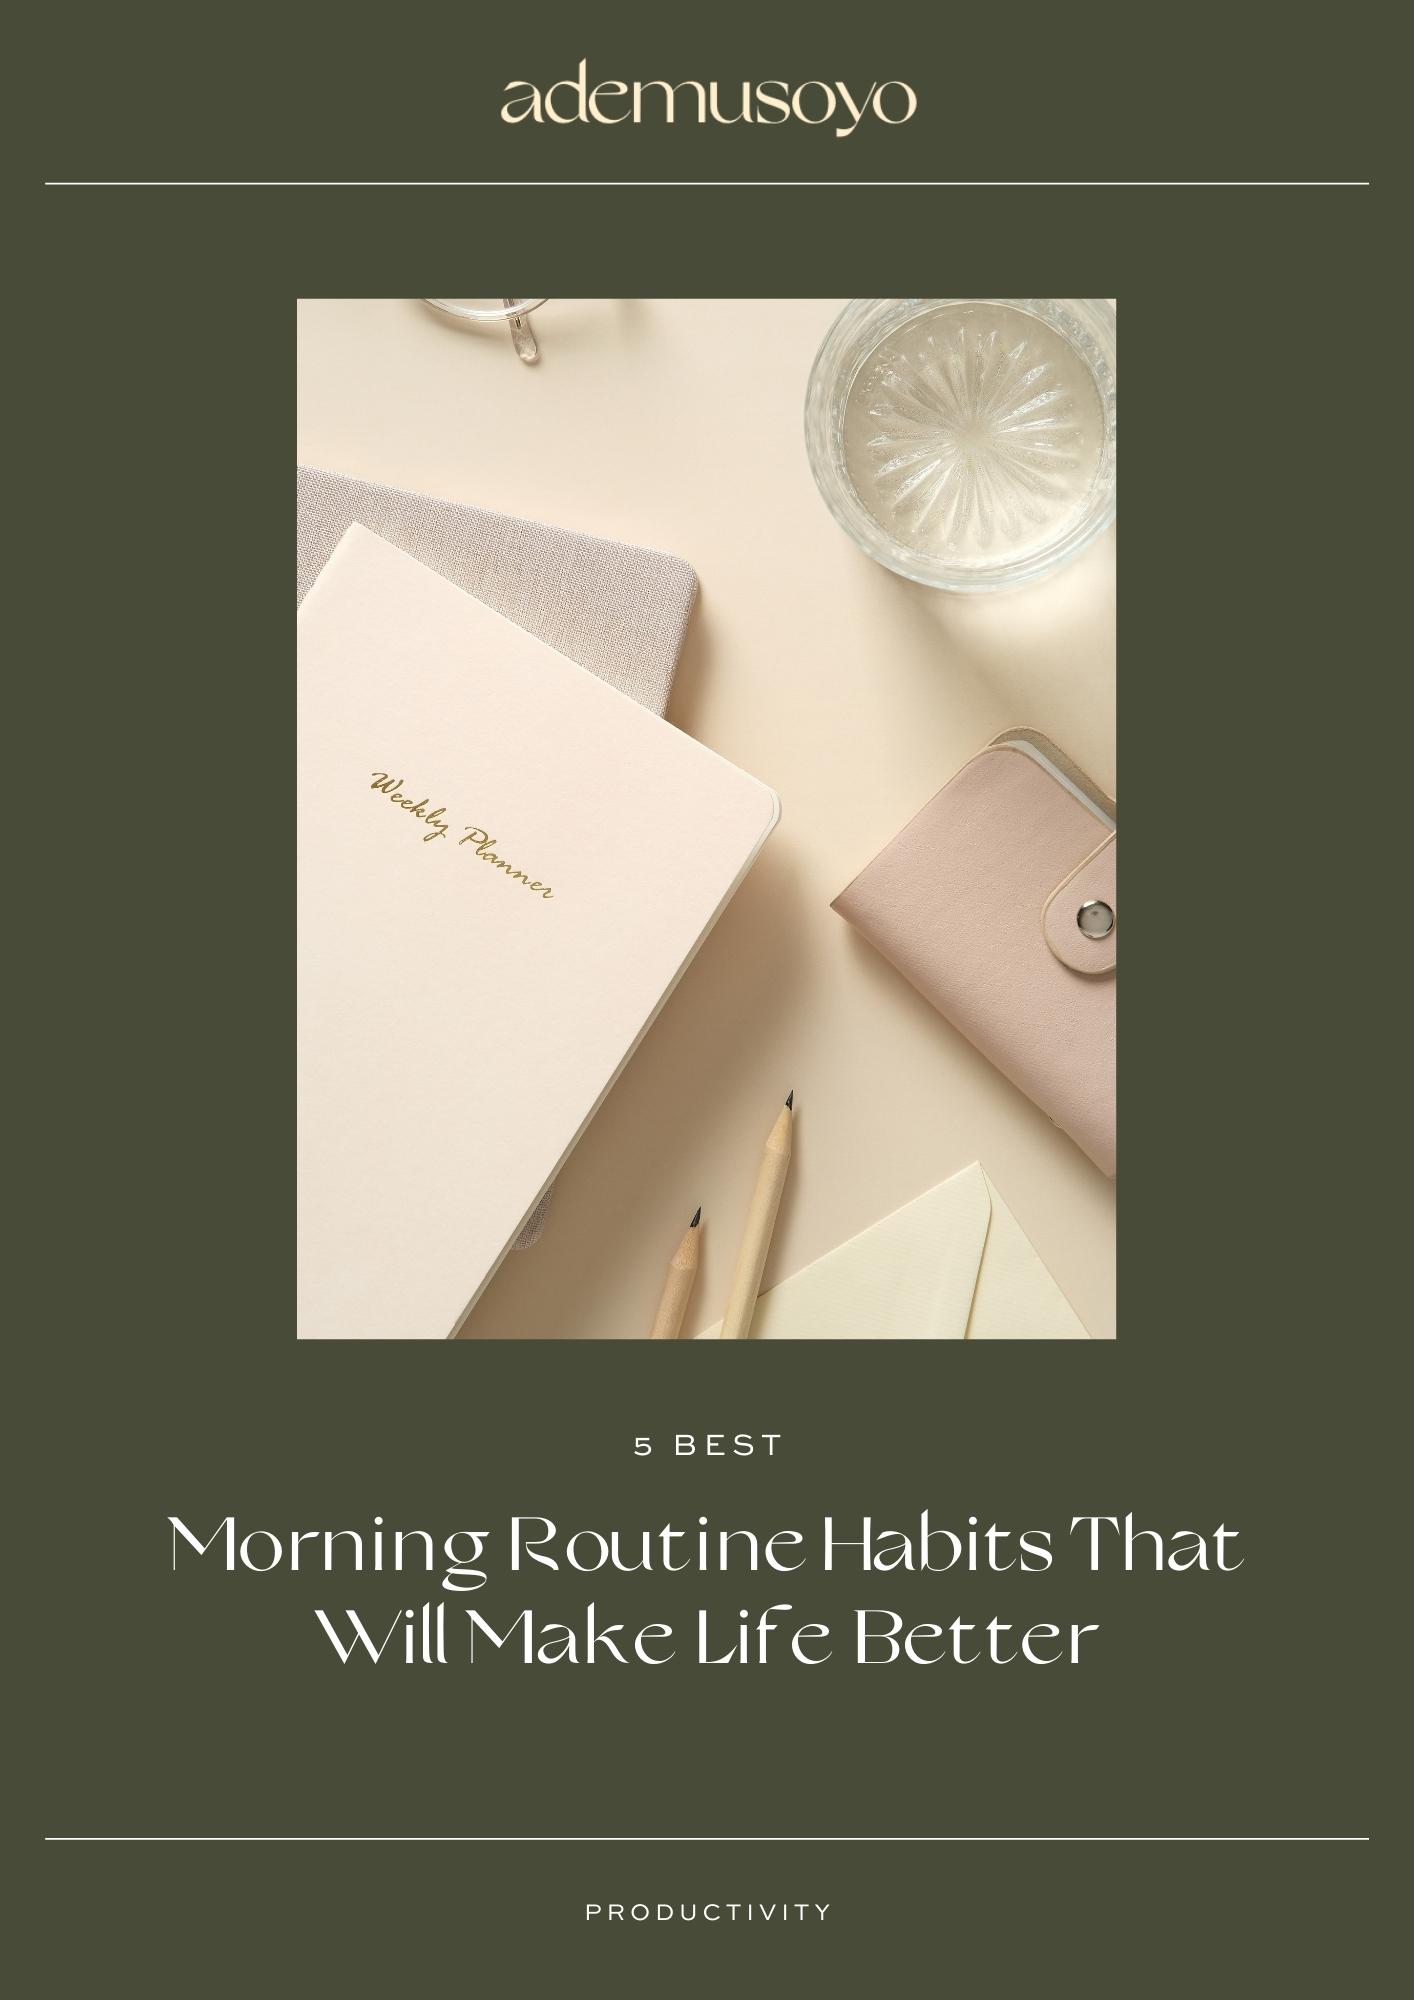 Learn about the 5 best morning routines & habits that can positively impact your life. Discover how to create a fulfilling morning routine for success & improved productivity.